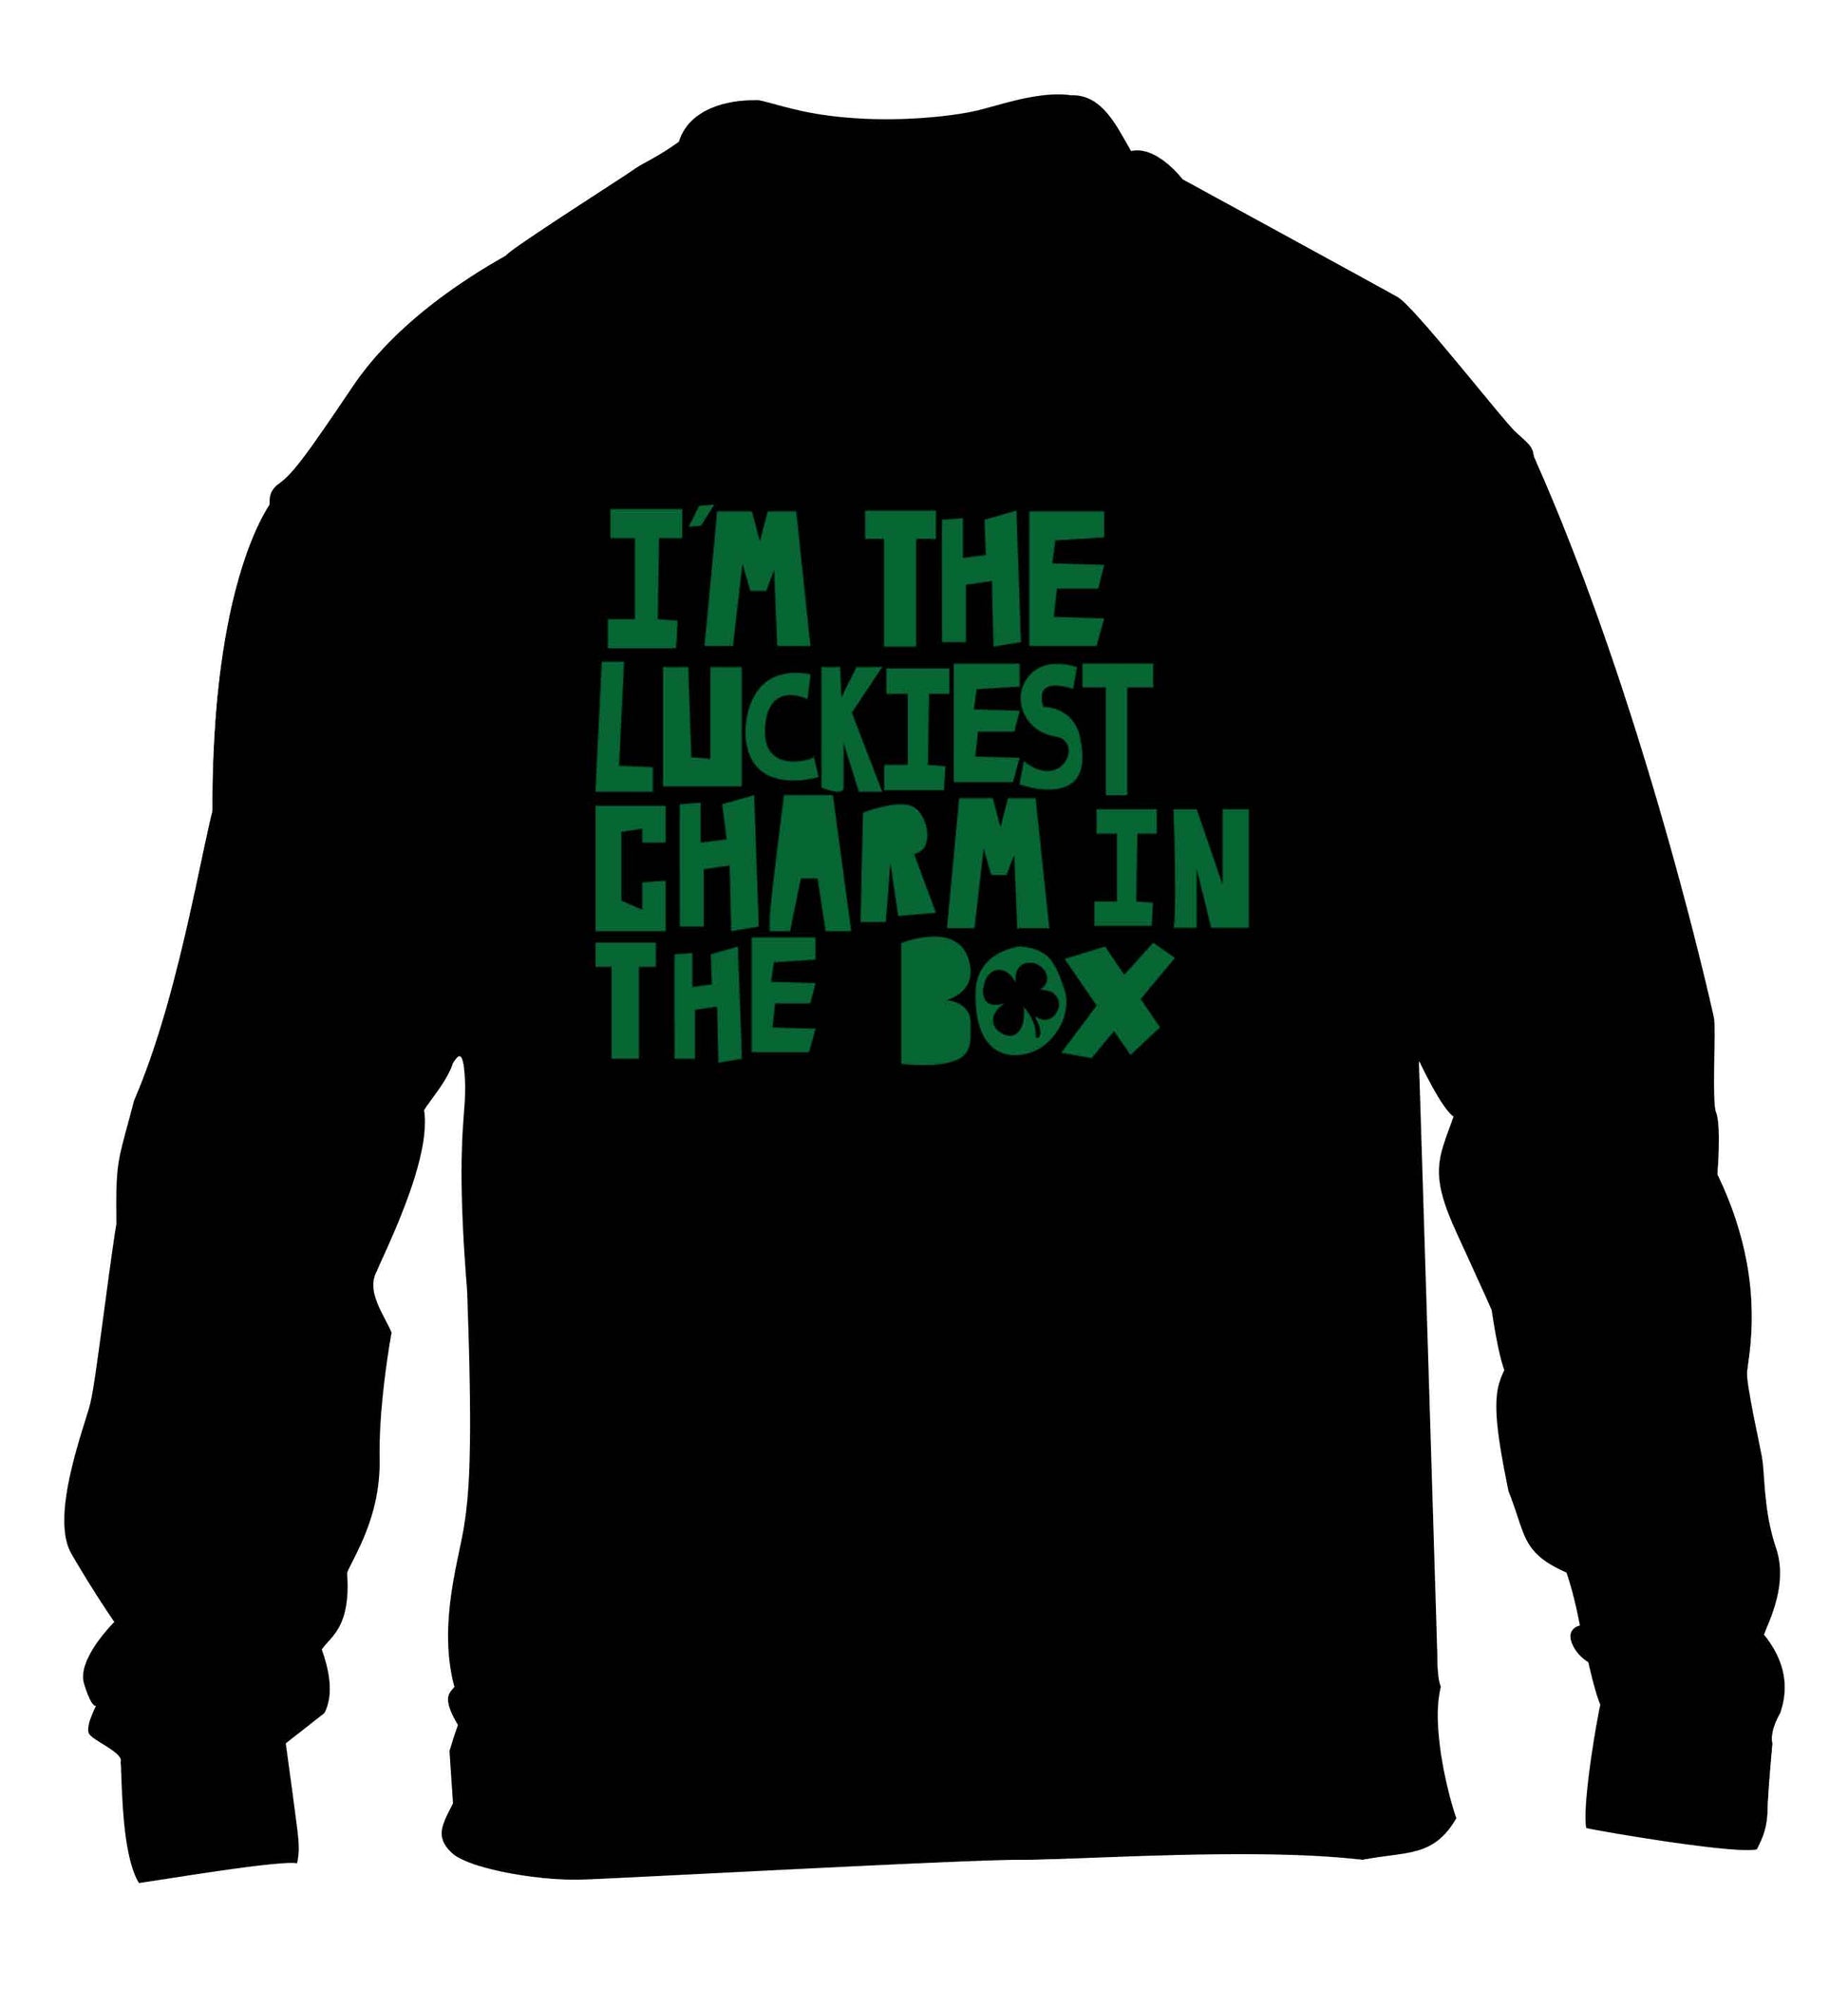 I'm the luckiest charm in the box children's black sweater 12-13 Years